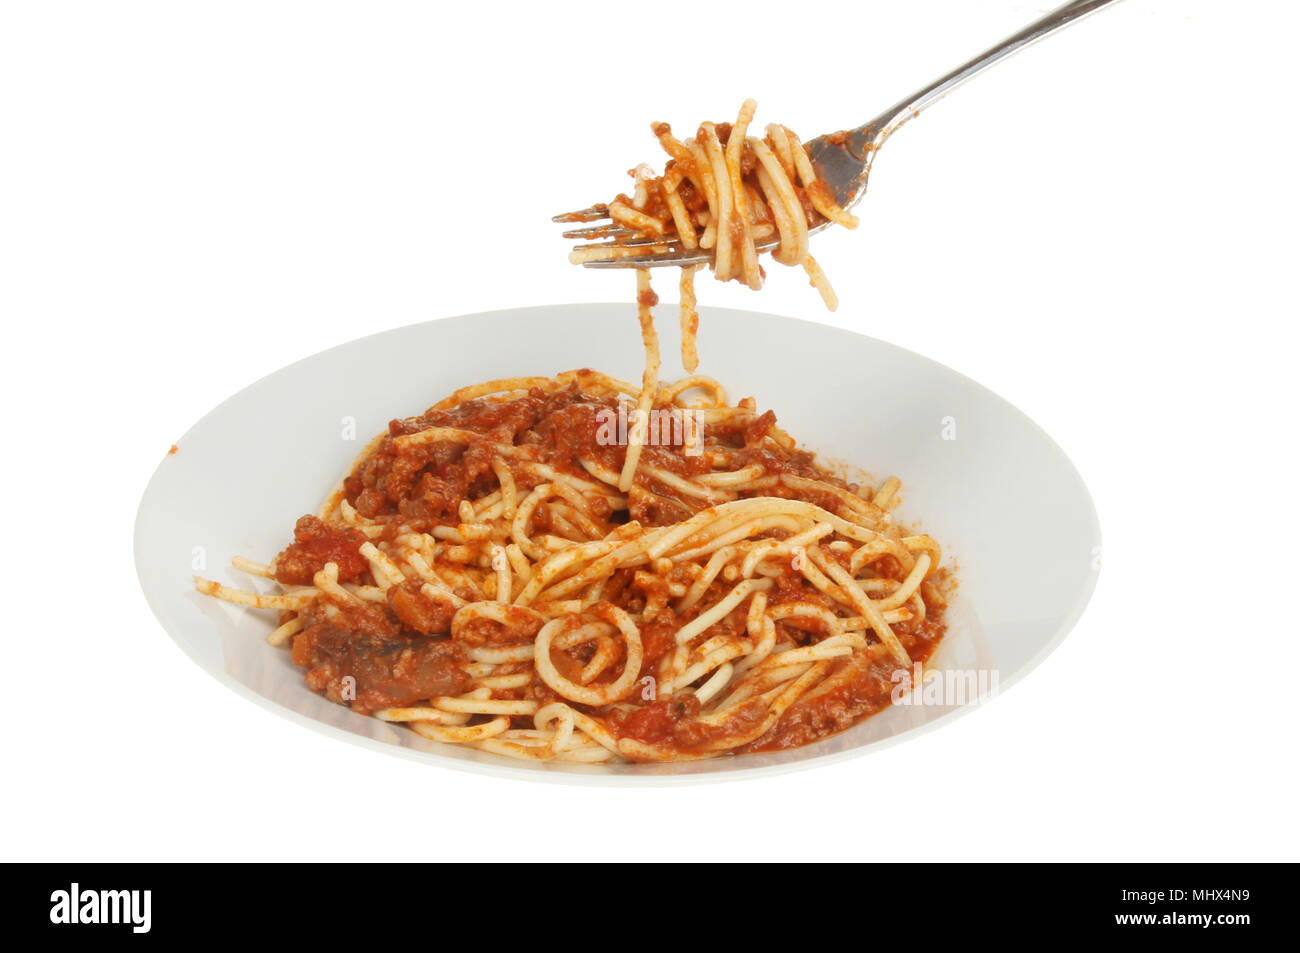 Spaghetti bolognese ina bowl with a fork isolated against white Stock Photo